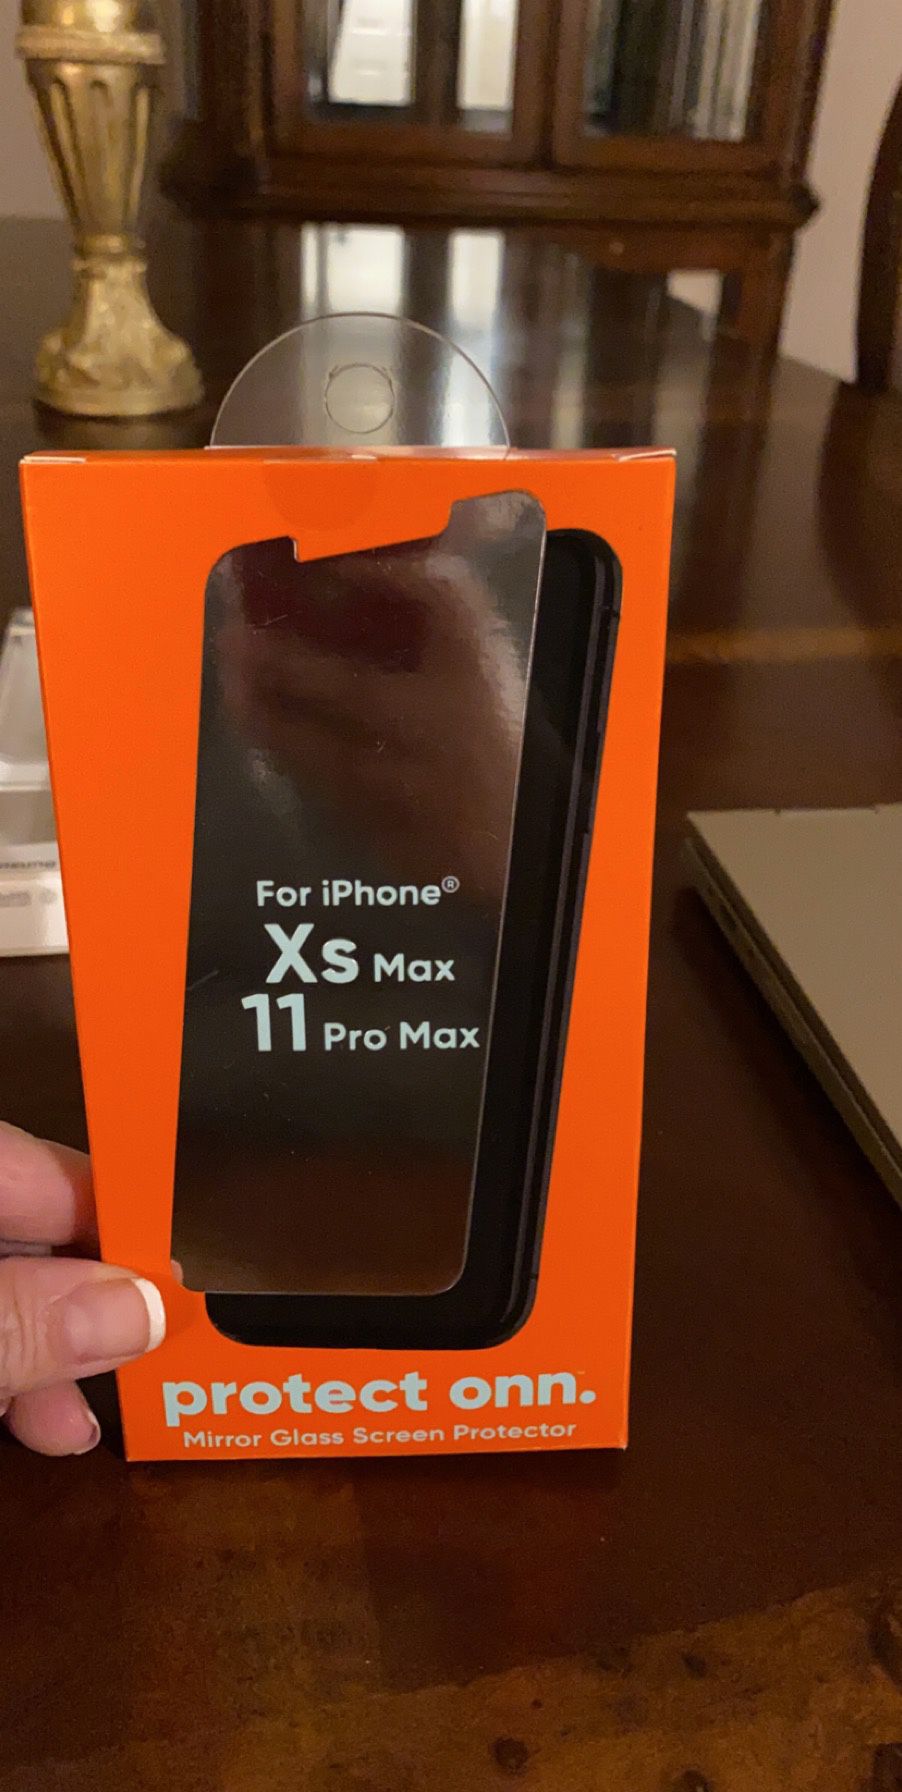 iPhone XS Max or iPhone 11 Pro Max, Mirror glass screen protector